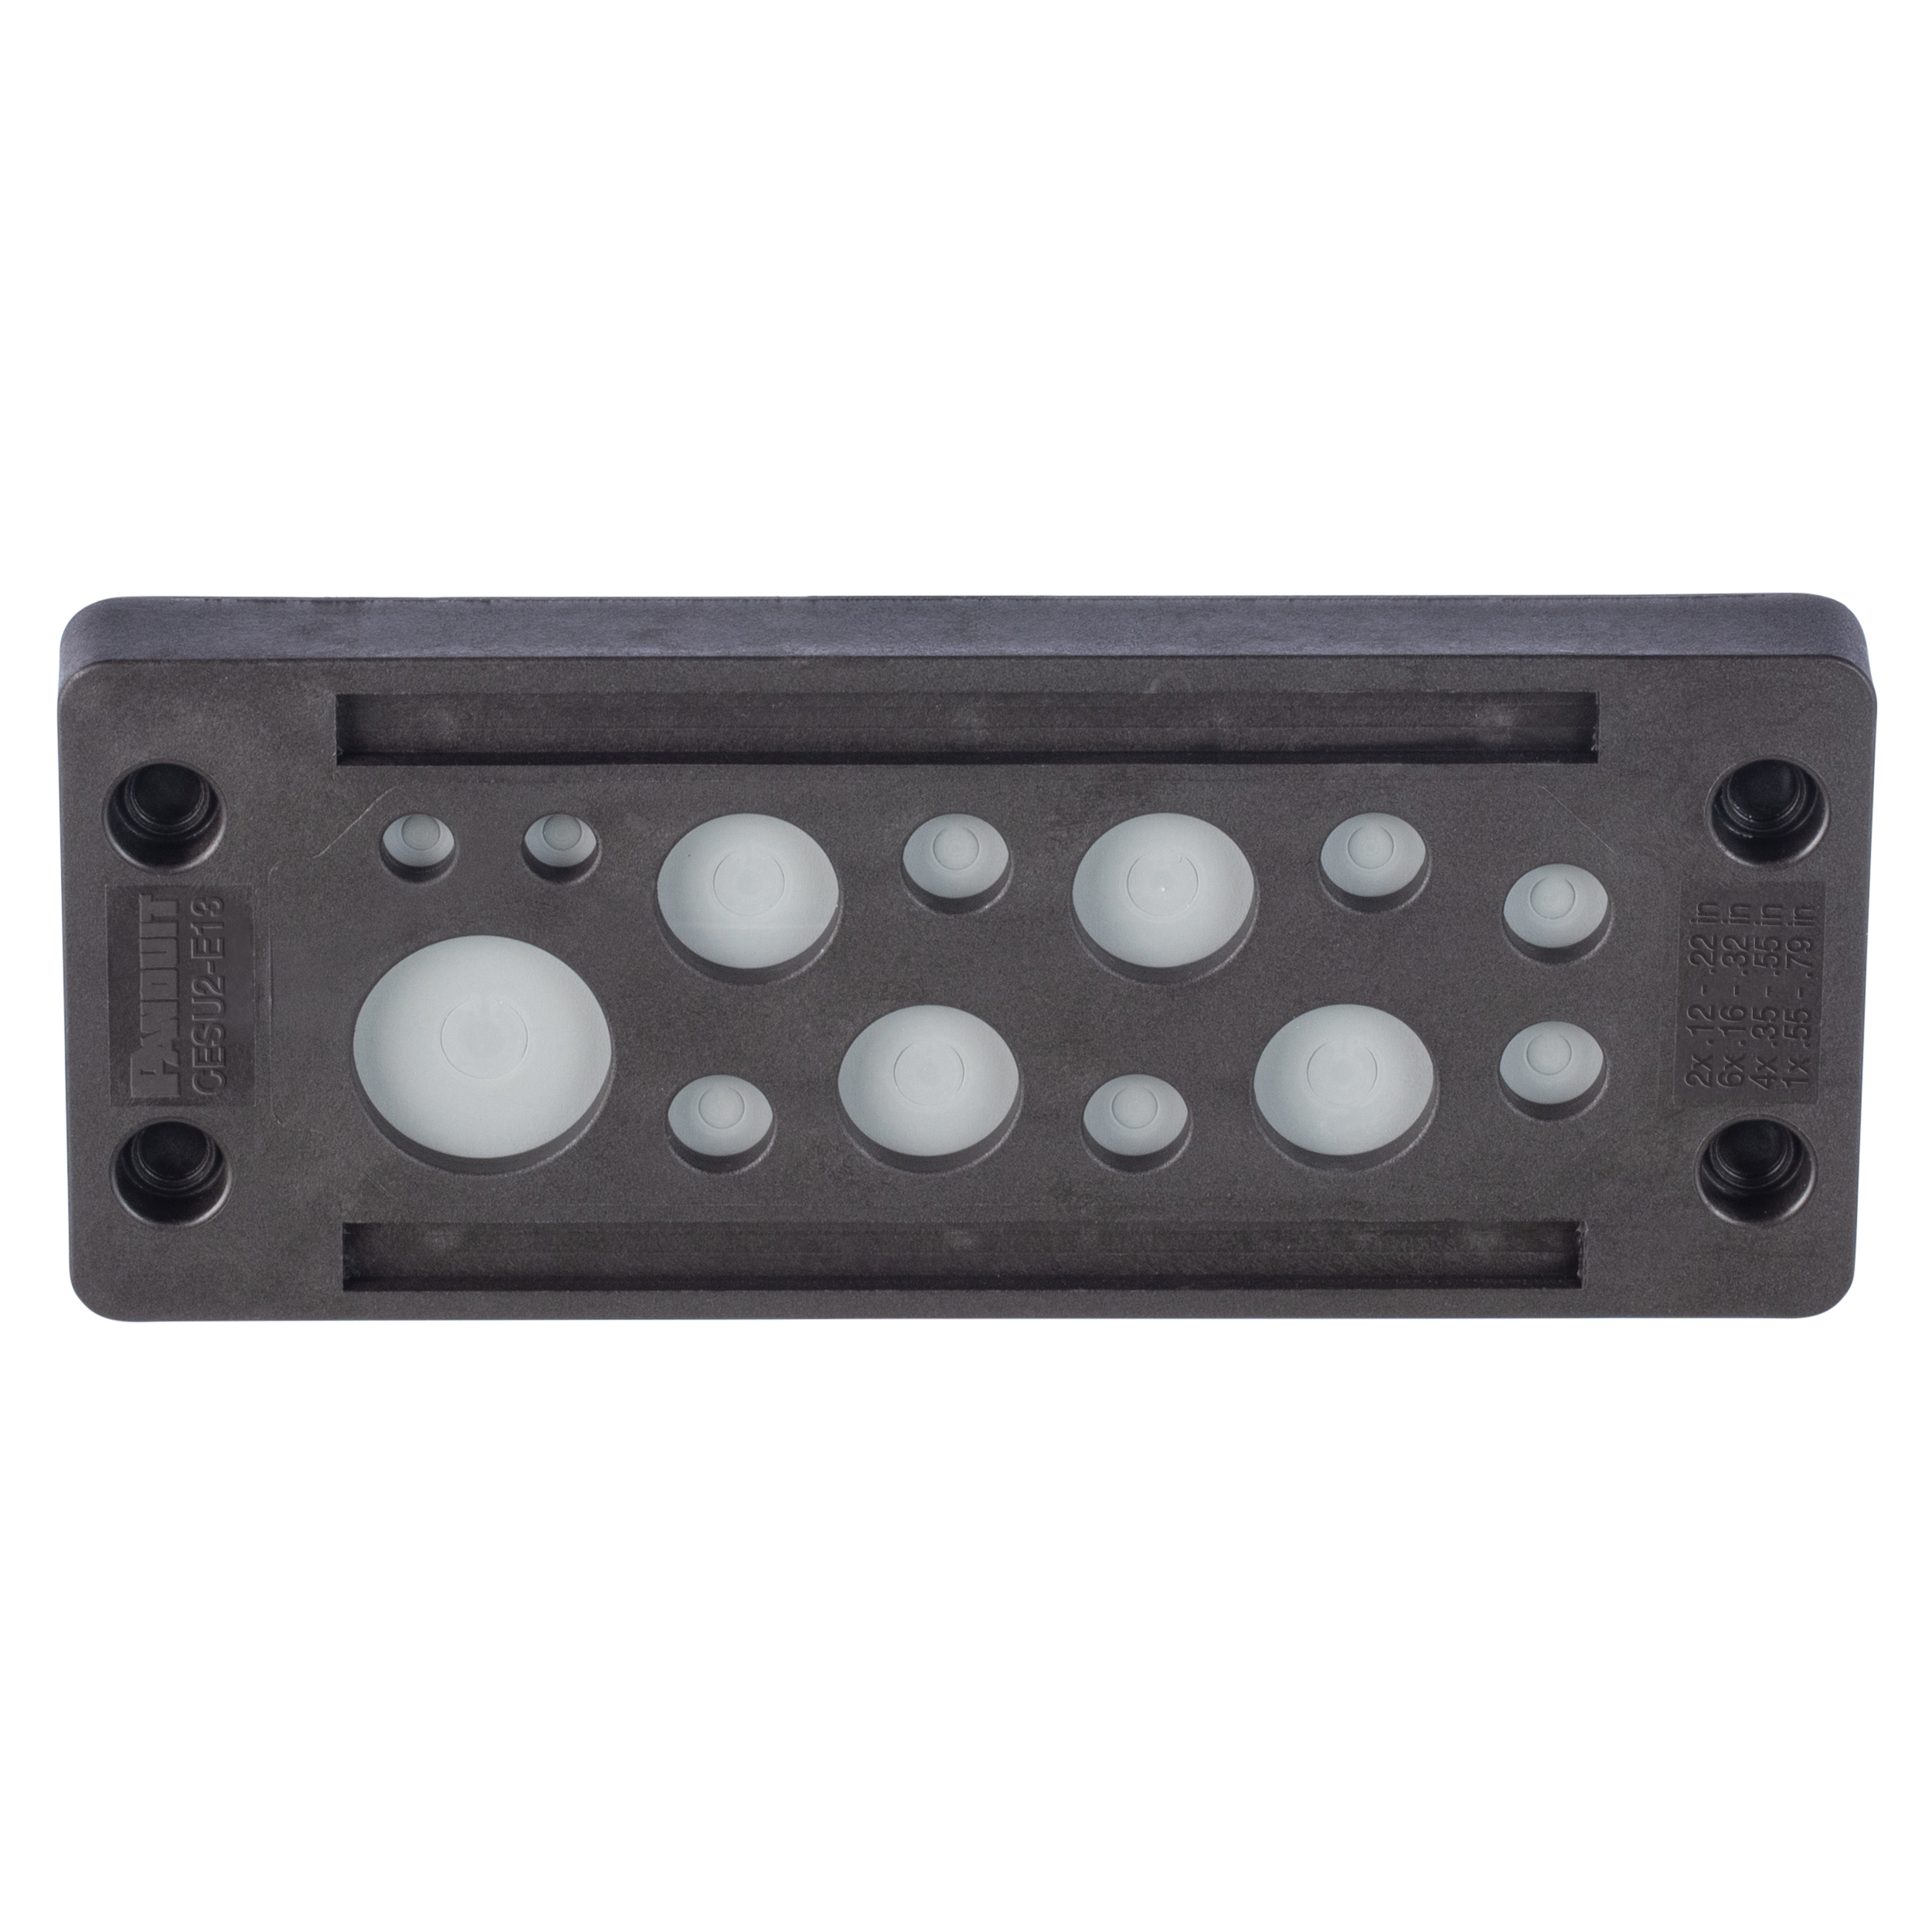 Cable Entry System, Un-Terminated, IP65, 4.41"X1.42",13 holes,1PC